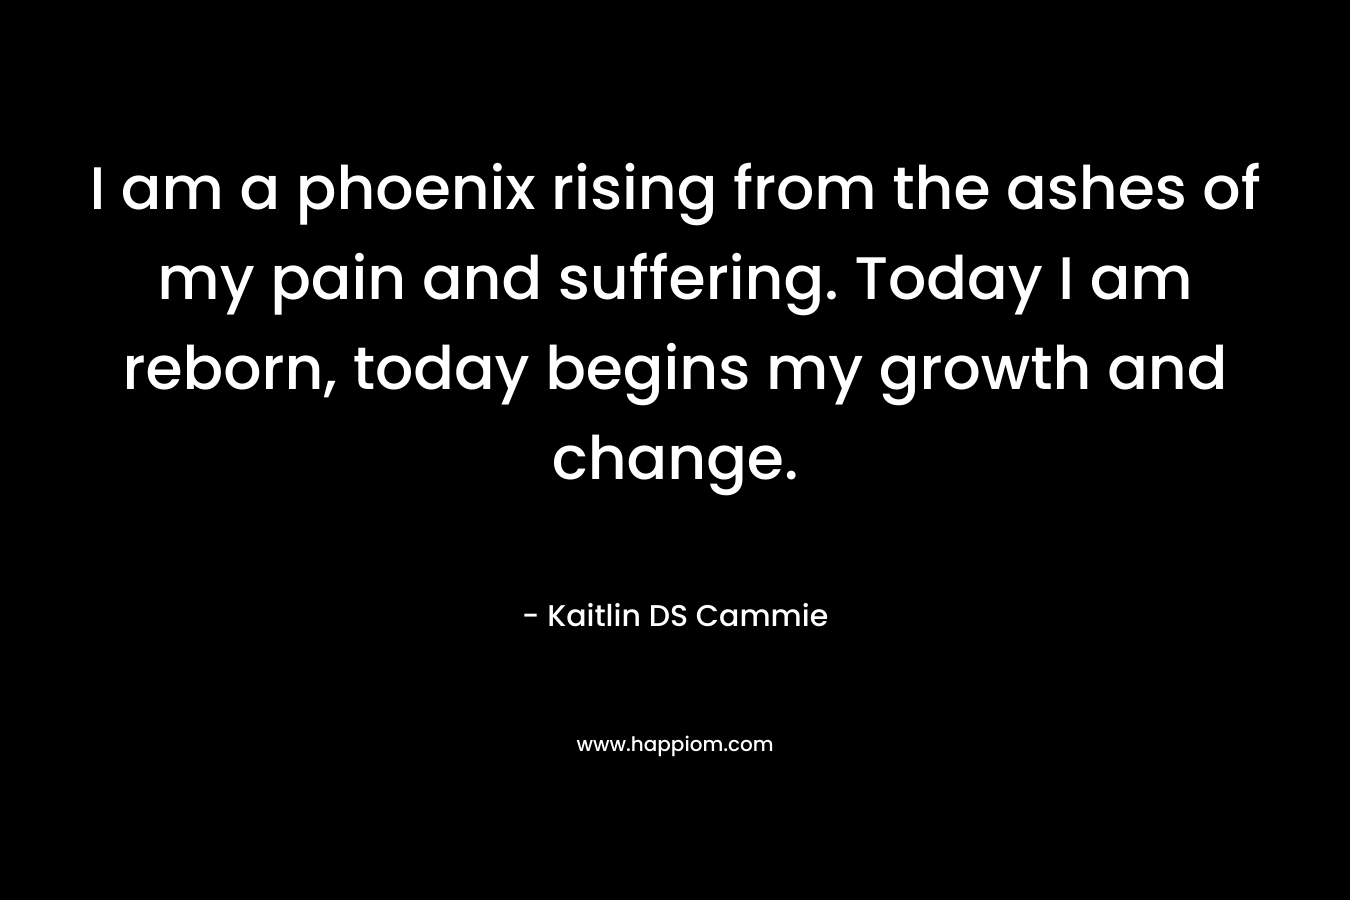 I am a phoenix rising from the ashes of my pain and suffering. Today I am reborn, today begins my growth and change.